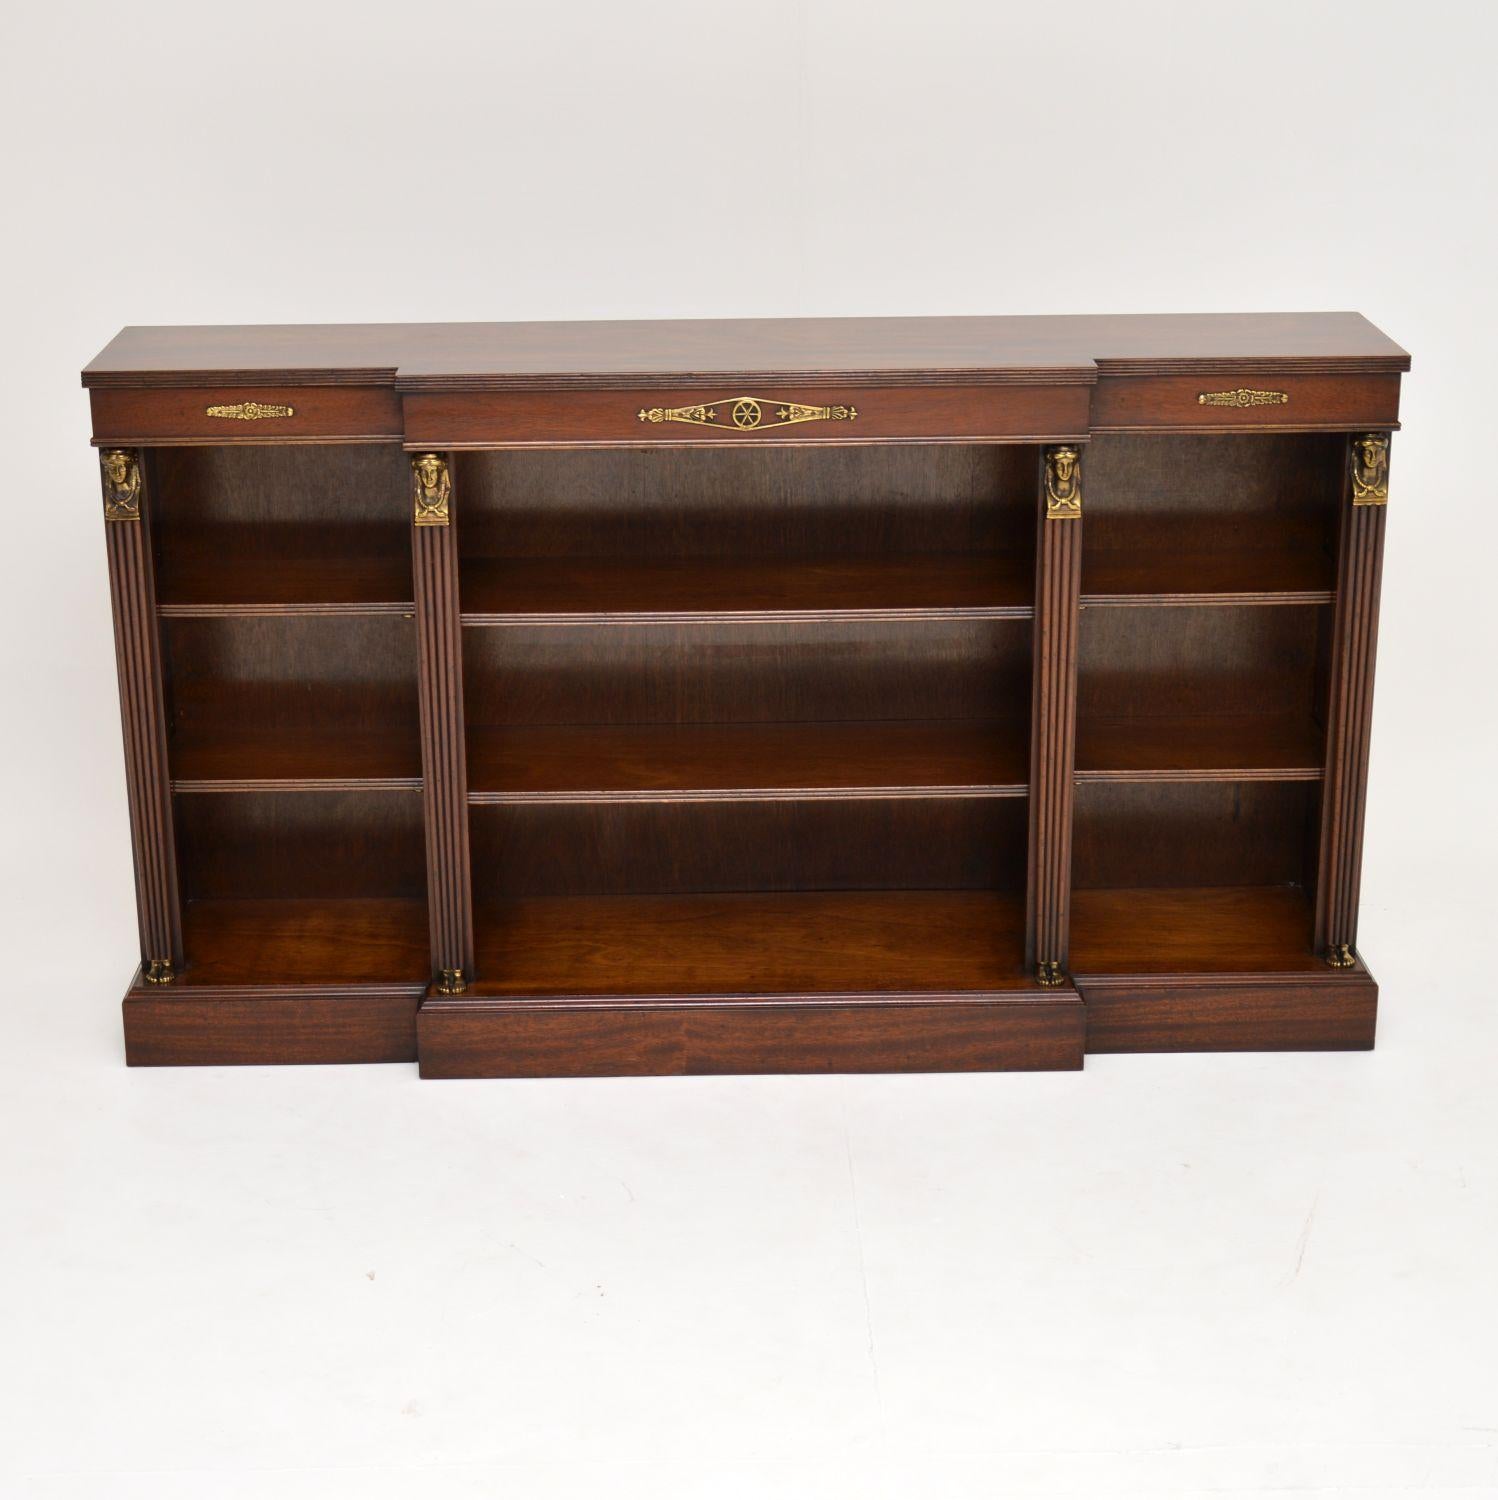 Antique mahogany neoclassical Regency style breakfront dwarf bookcase in excellent condition & dating to circa 1950s period.

This open bookcase has a reeded top edge & adjustable shelves, also with reeded edges. There are gilt bronze mounts